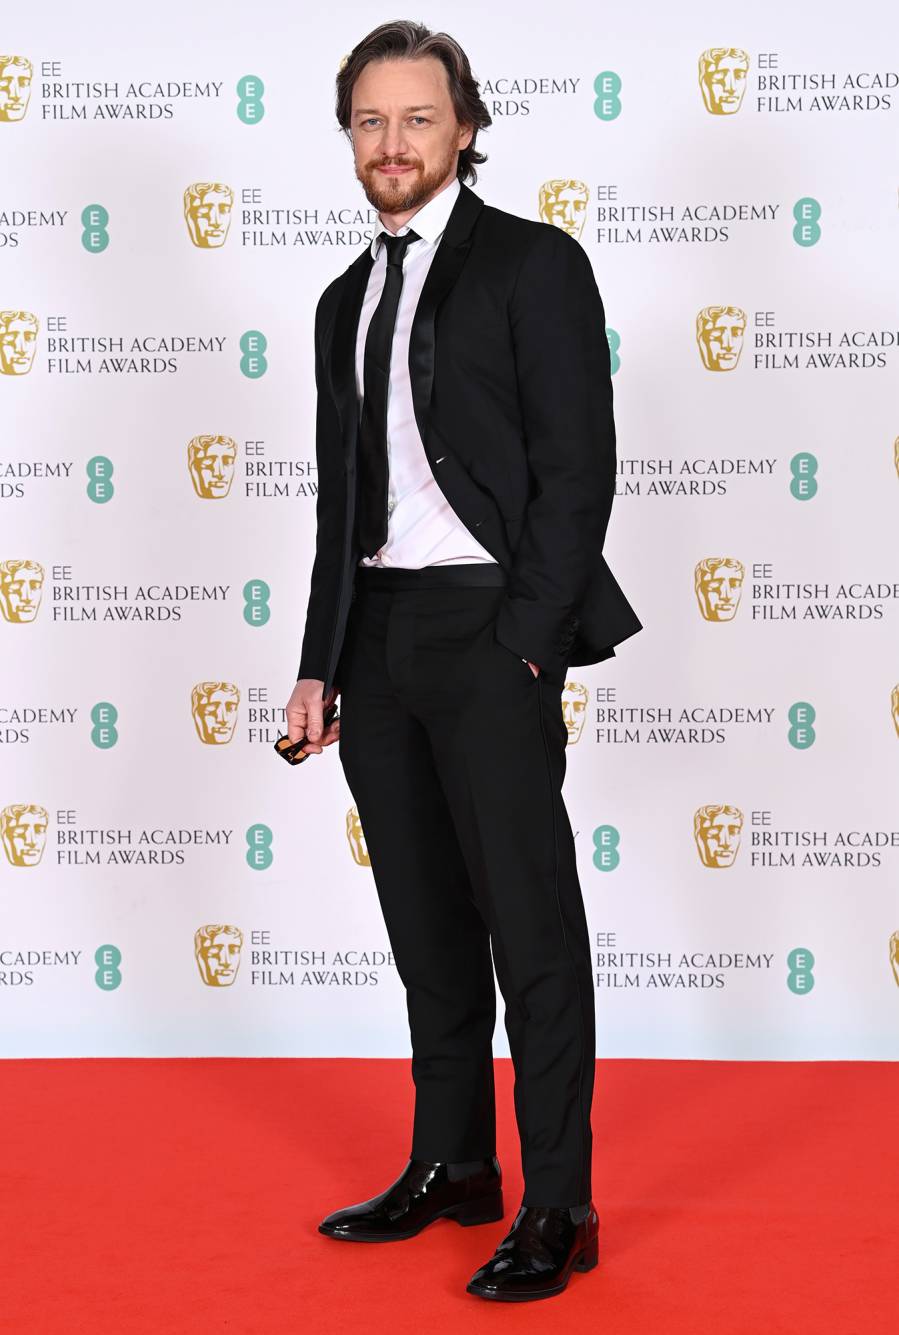 BAFTAs 2021 Red Carpet Fashion: What the Stars Wore